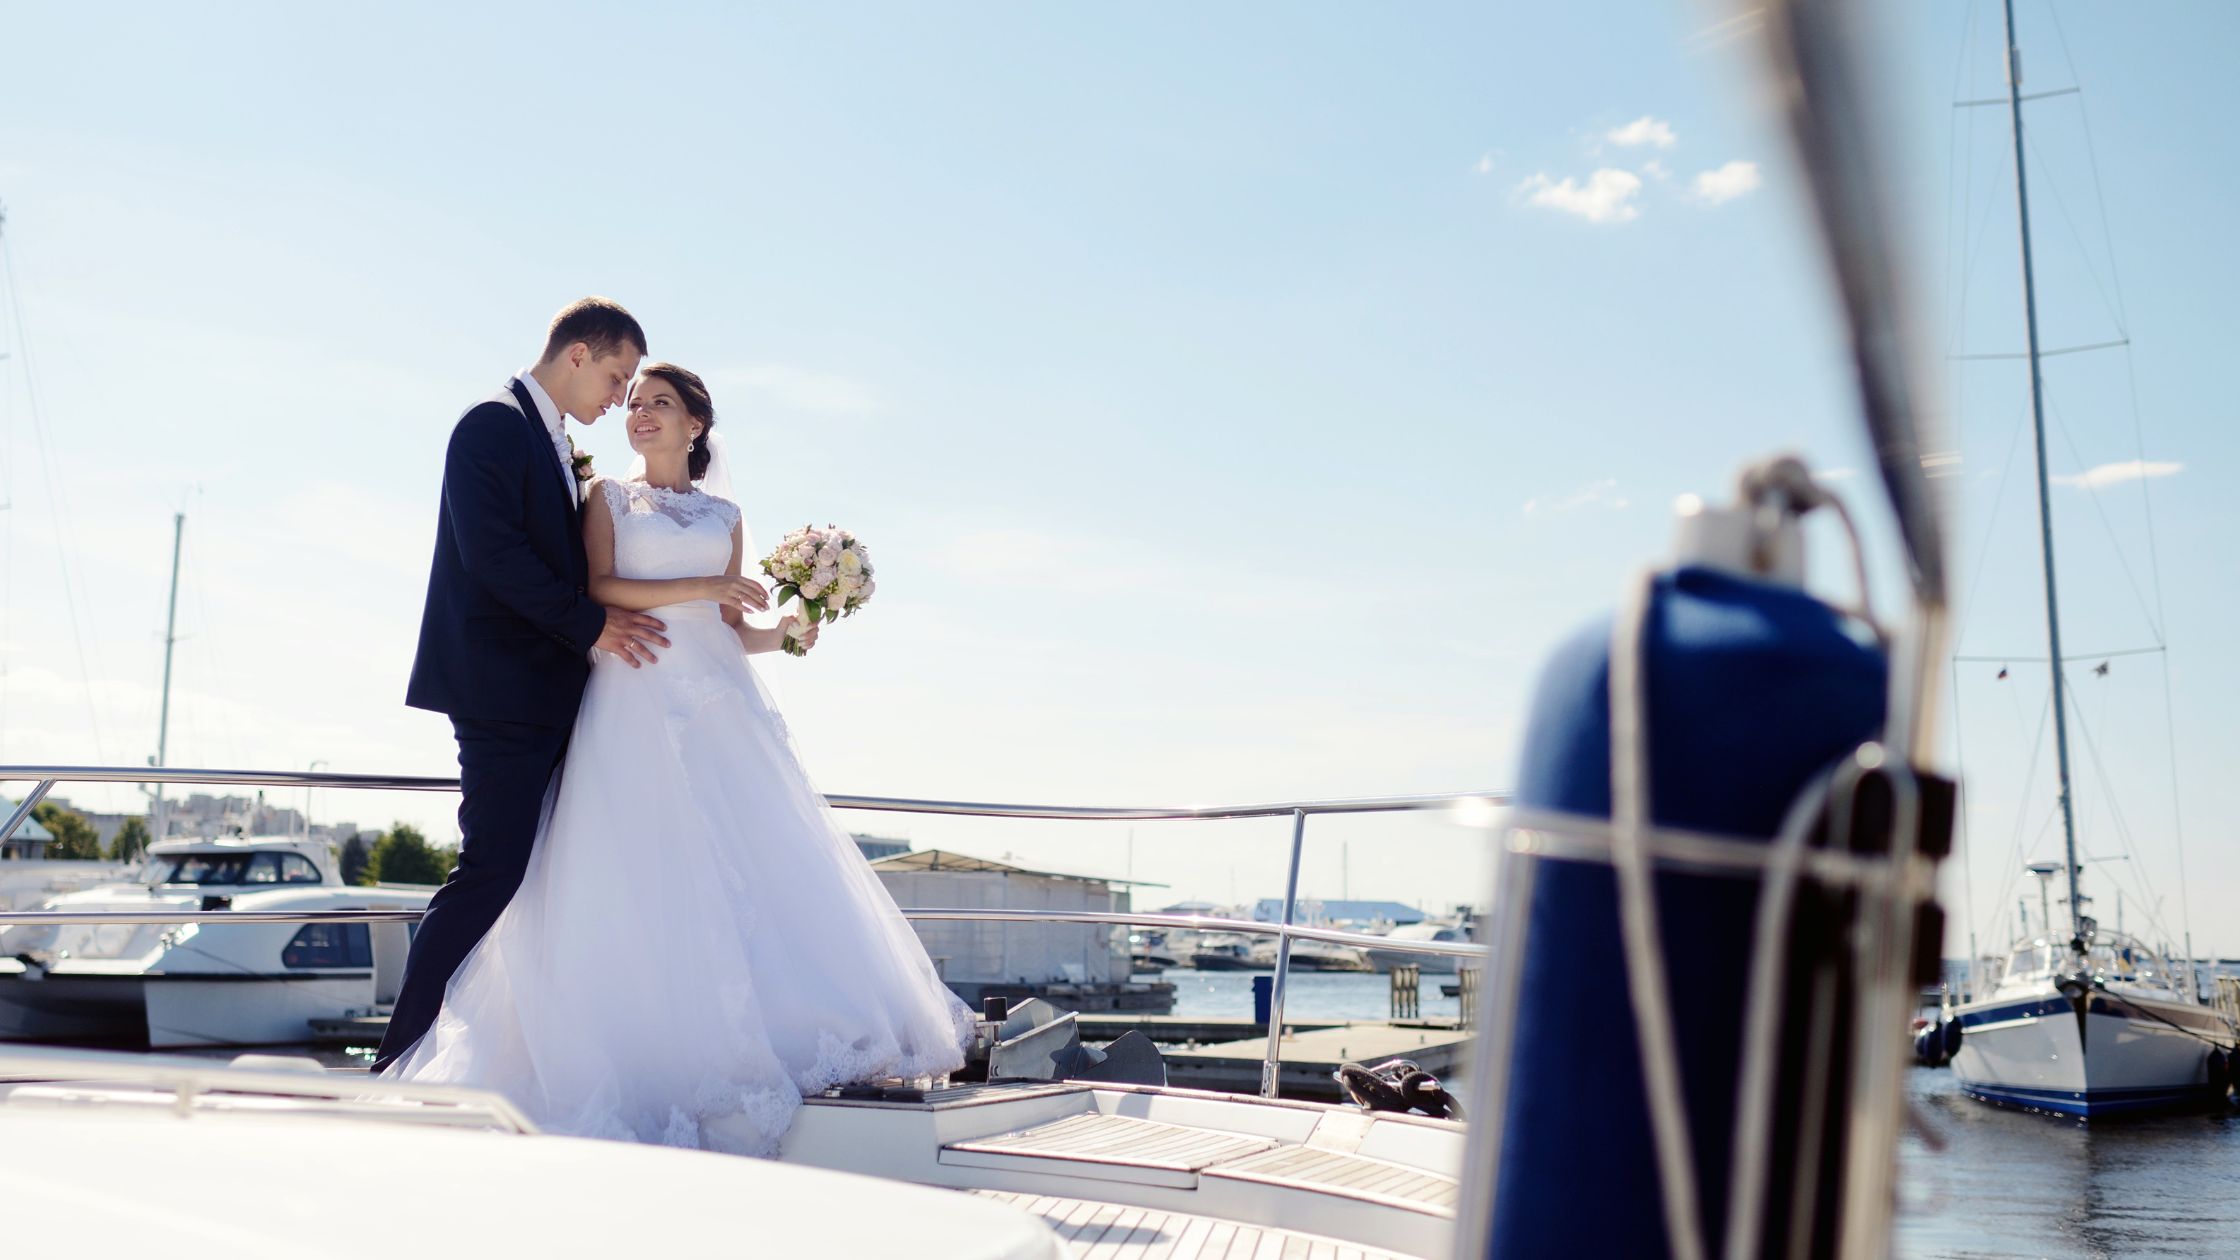 A loving couple at their yacht wedding